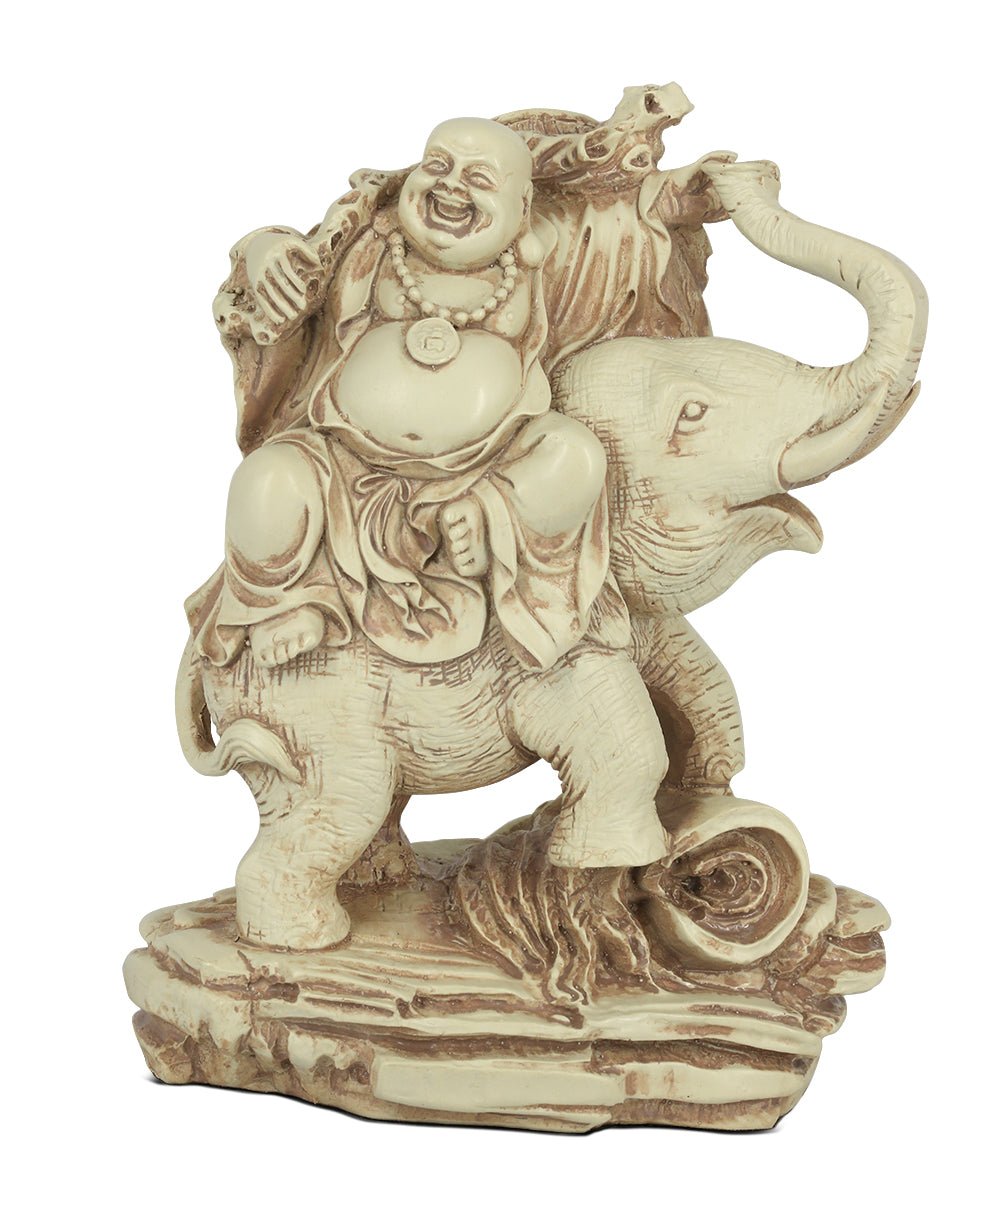 Happy Buddha and Elephant Statue - Sculptures & Statues